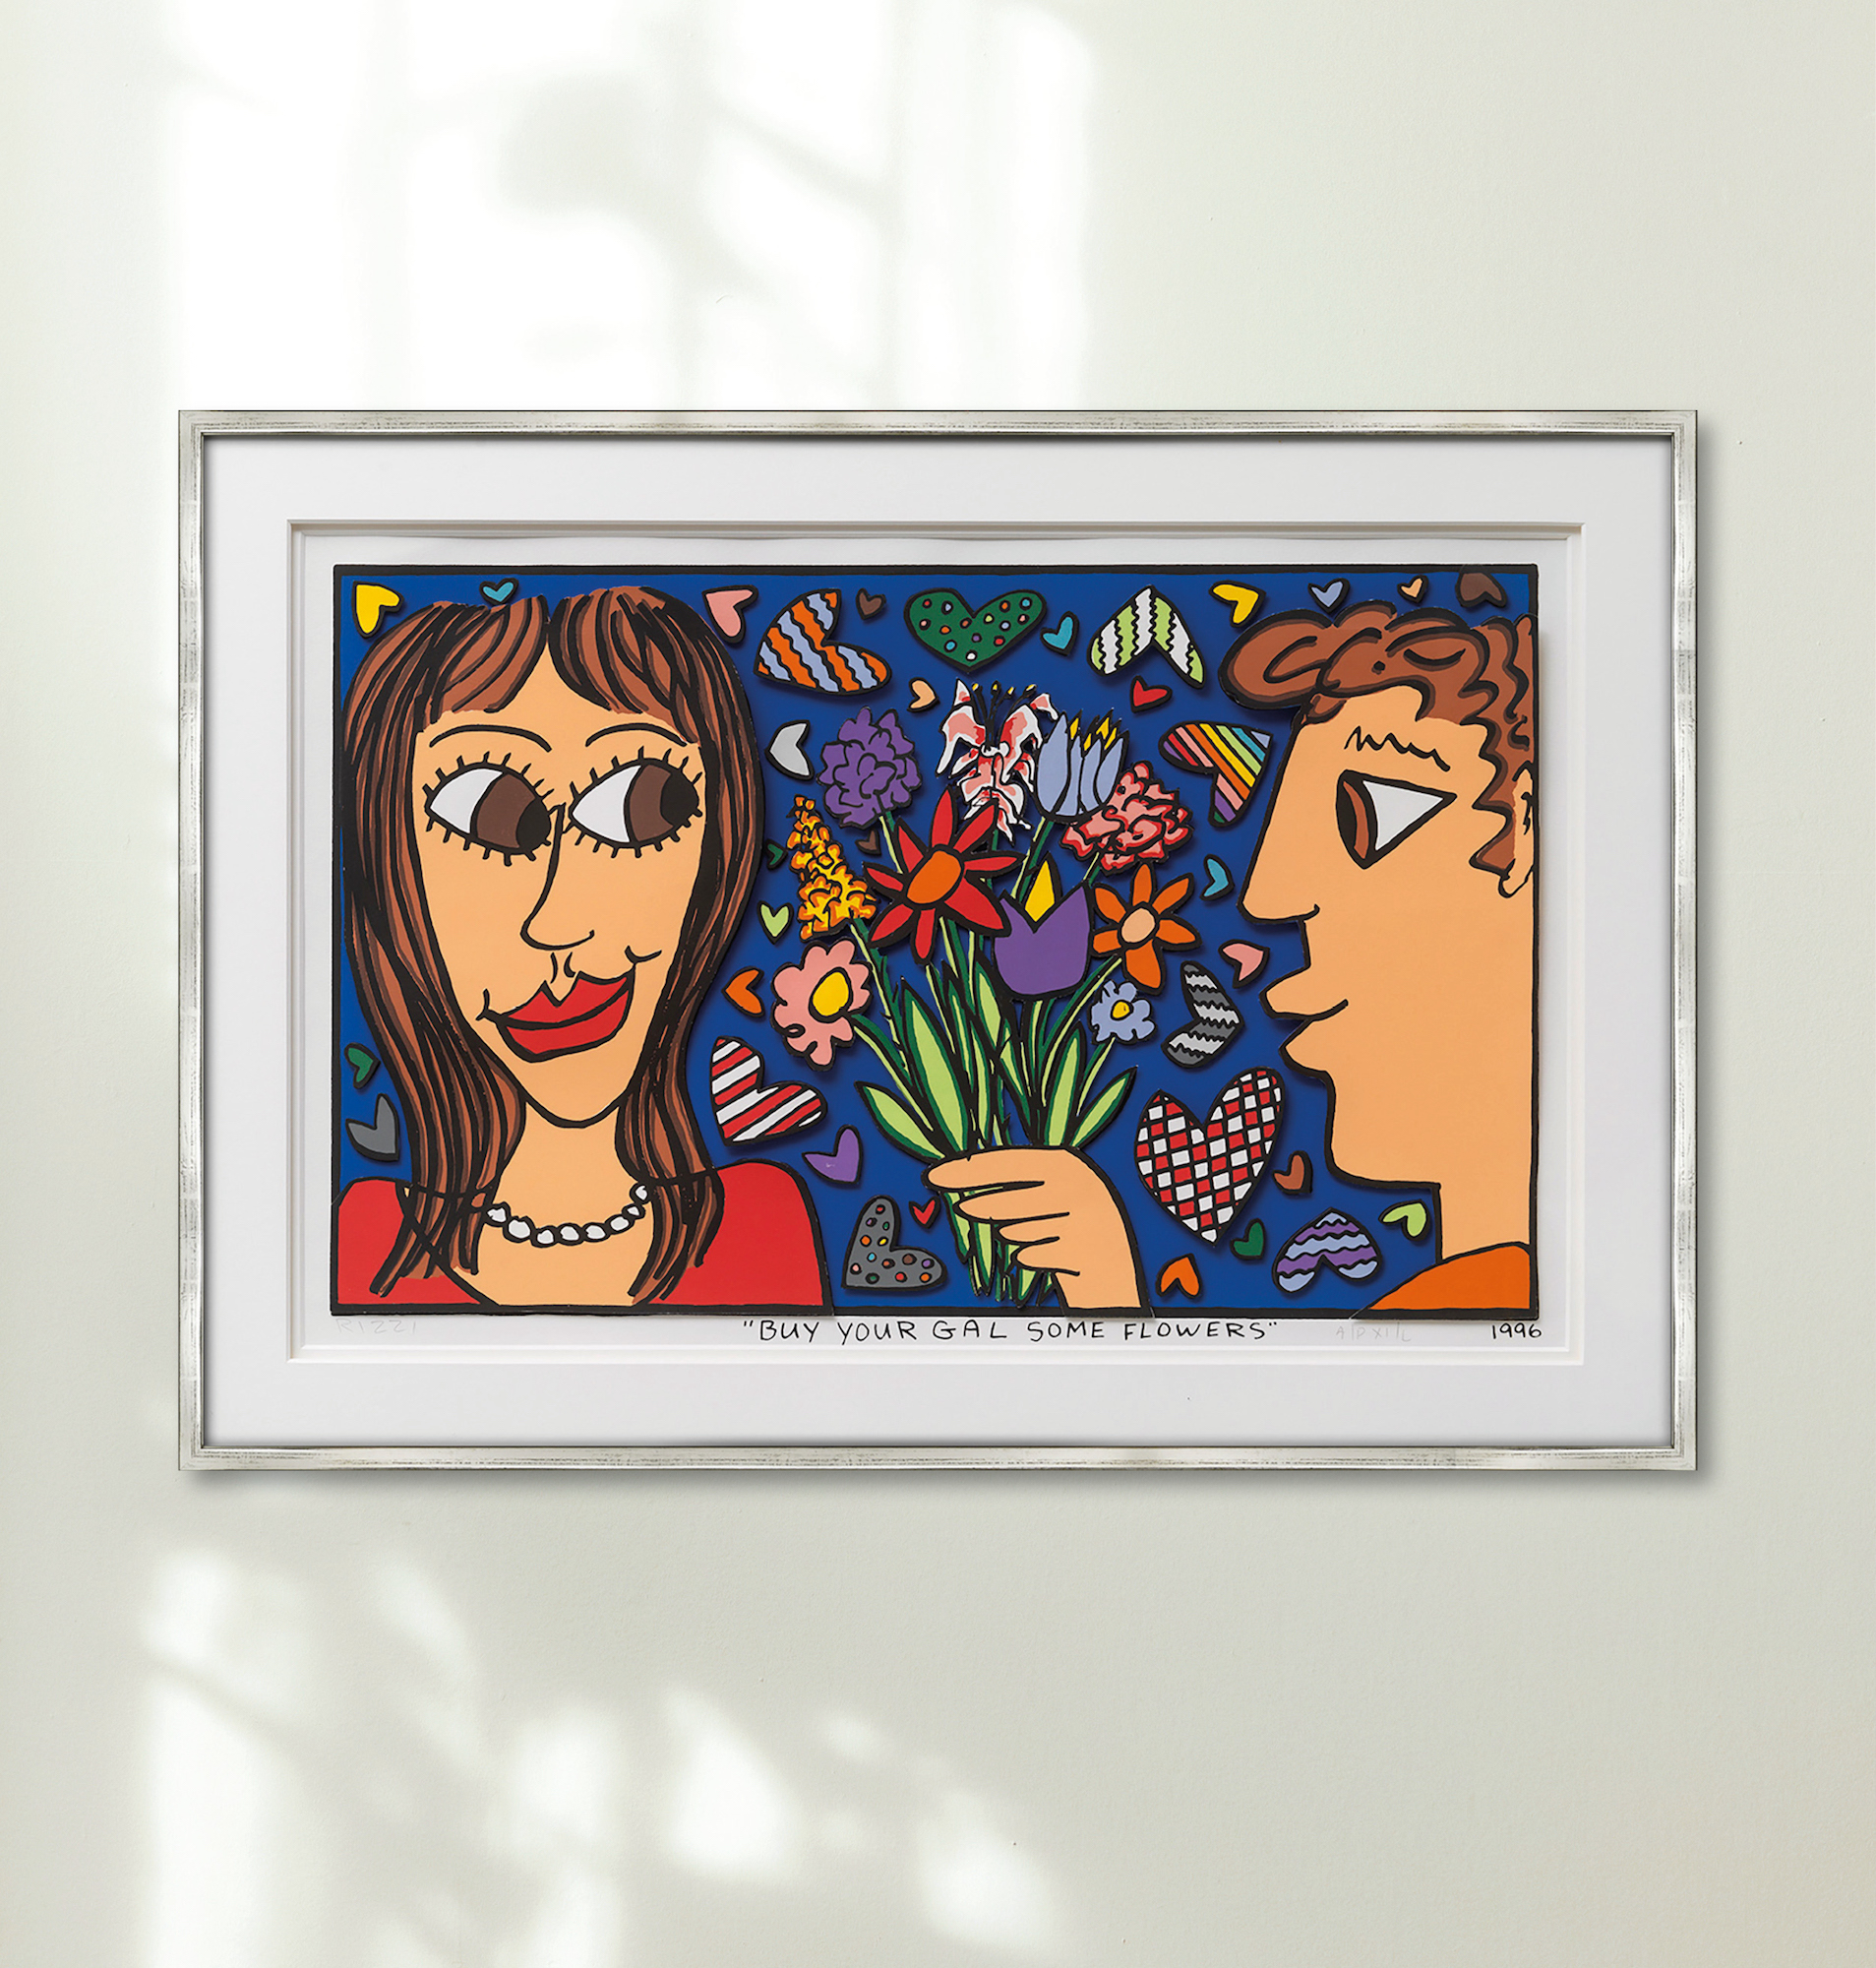 Bild "Buy your Gal some Flowers" (1996) by James Rizzi